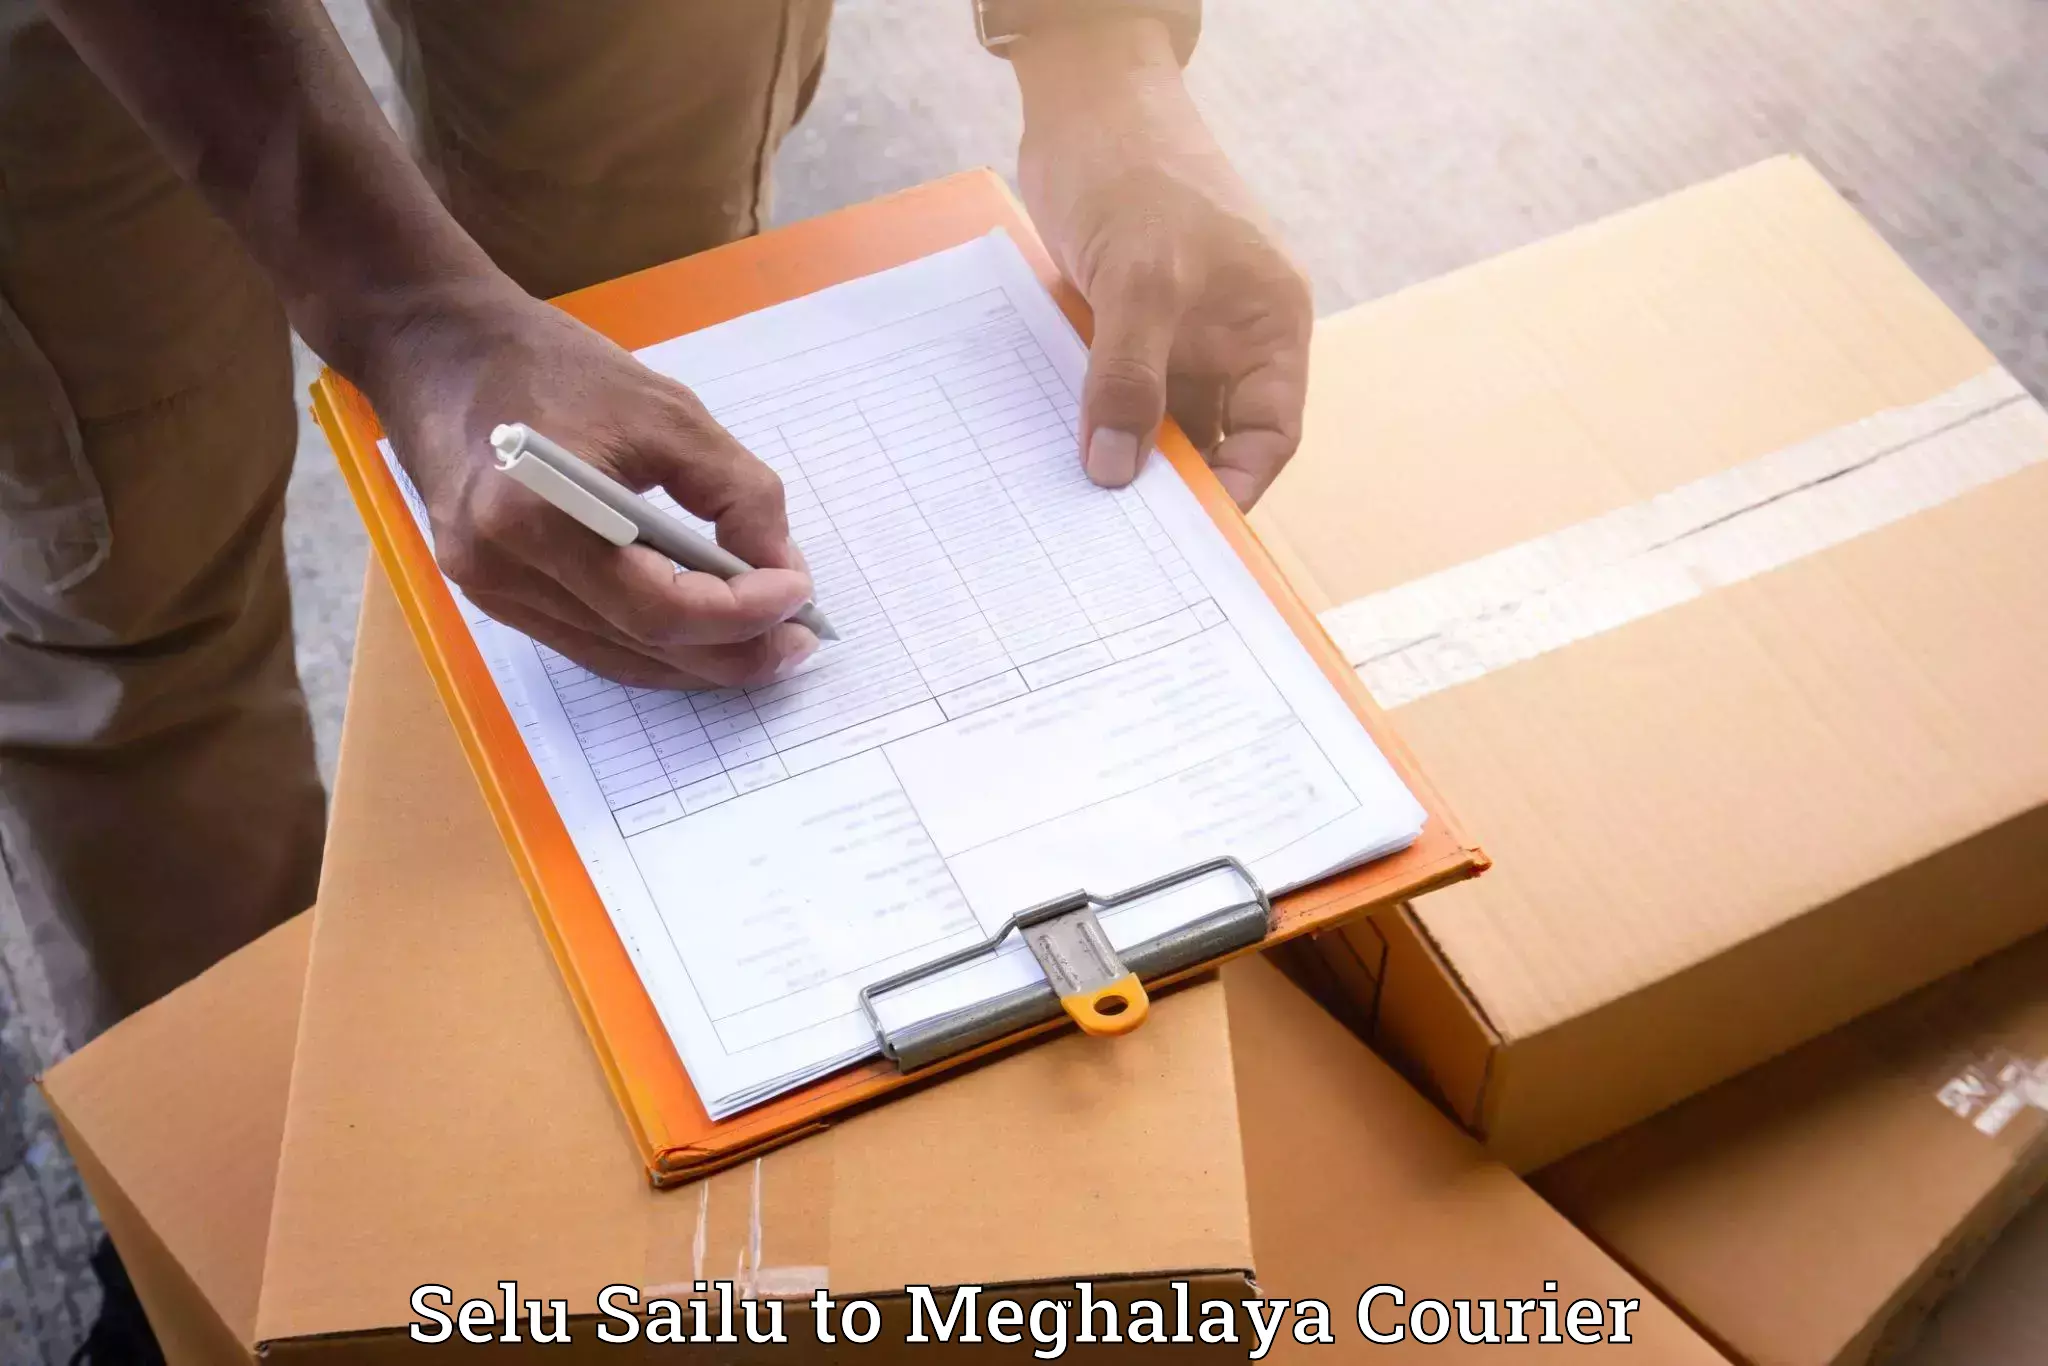 Furniture delivery service Selu Sailu to Shillong